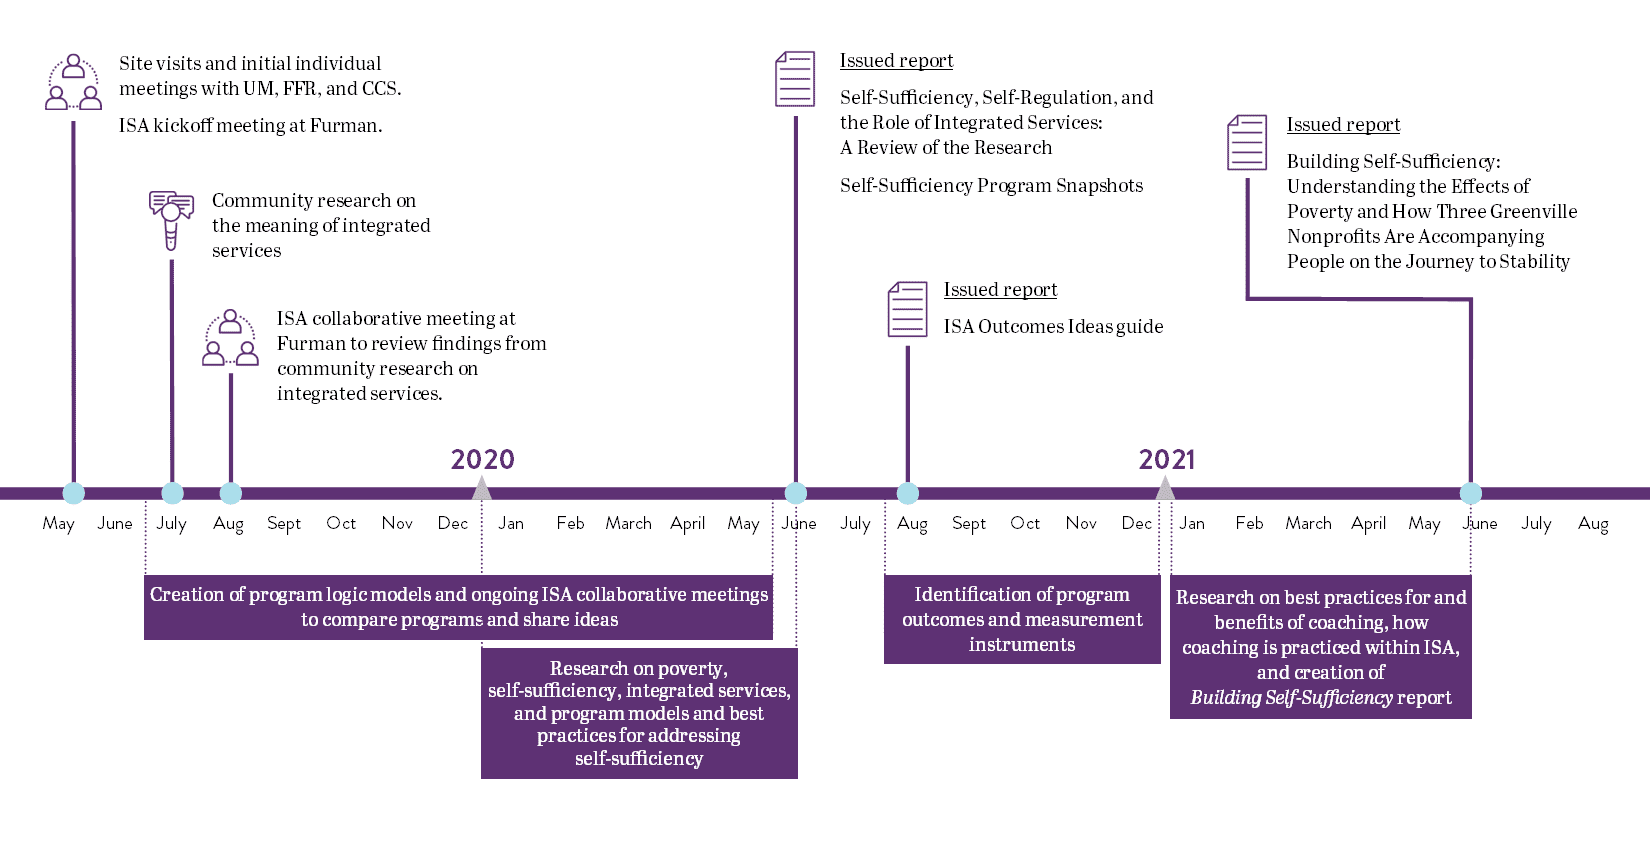 Timeline of ISA project